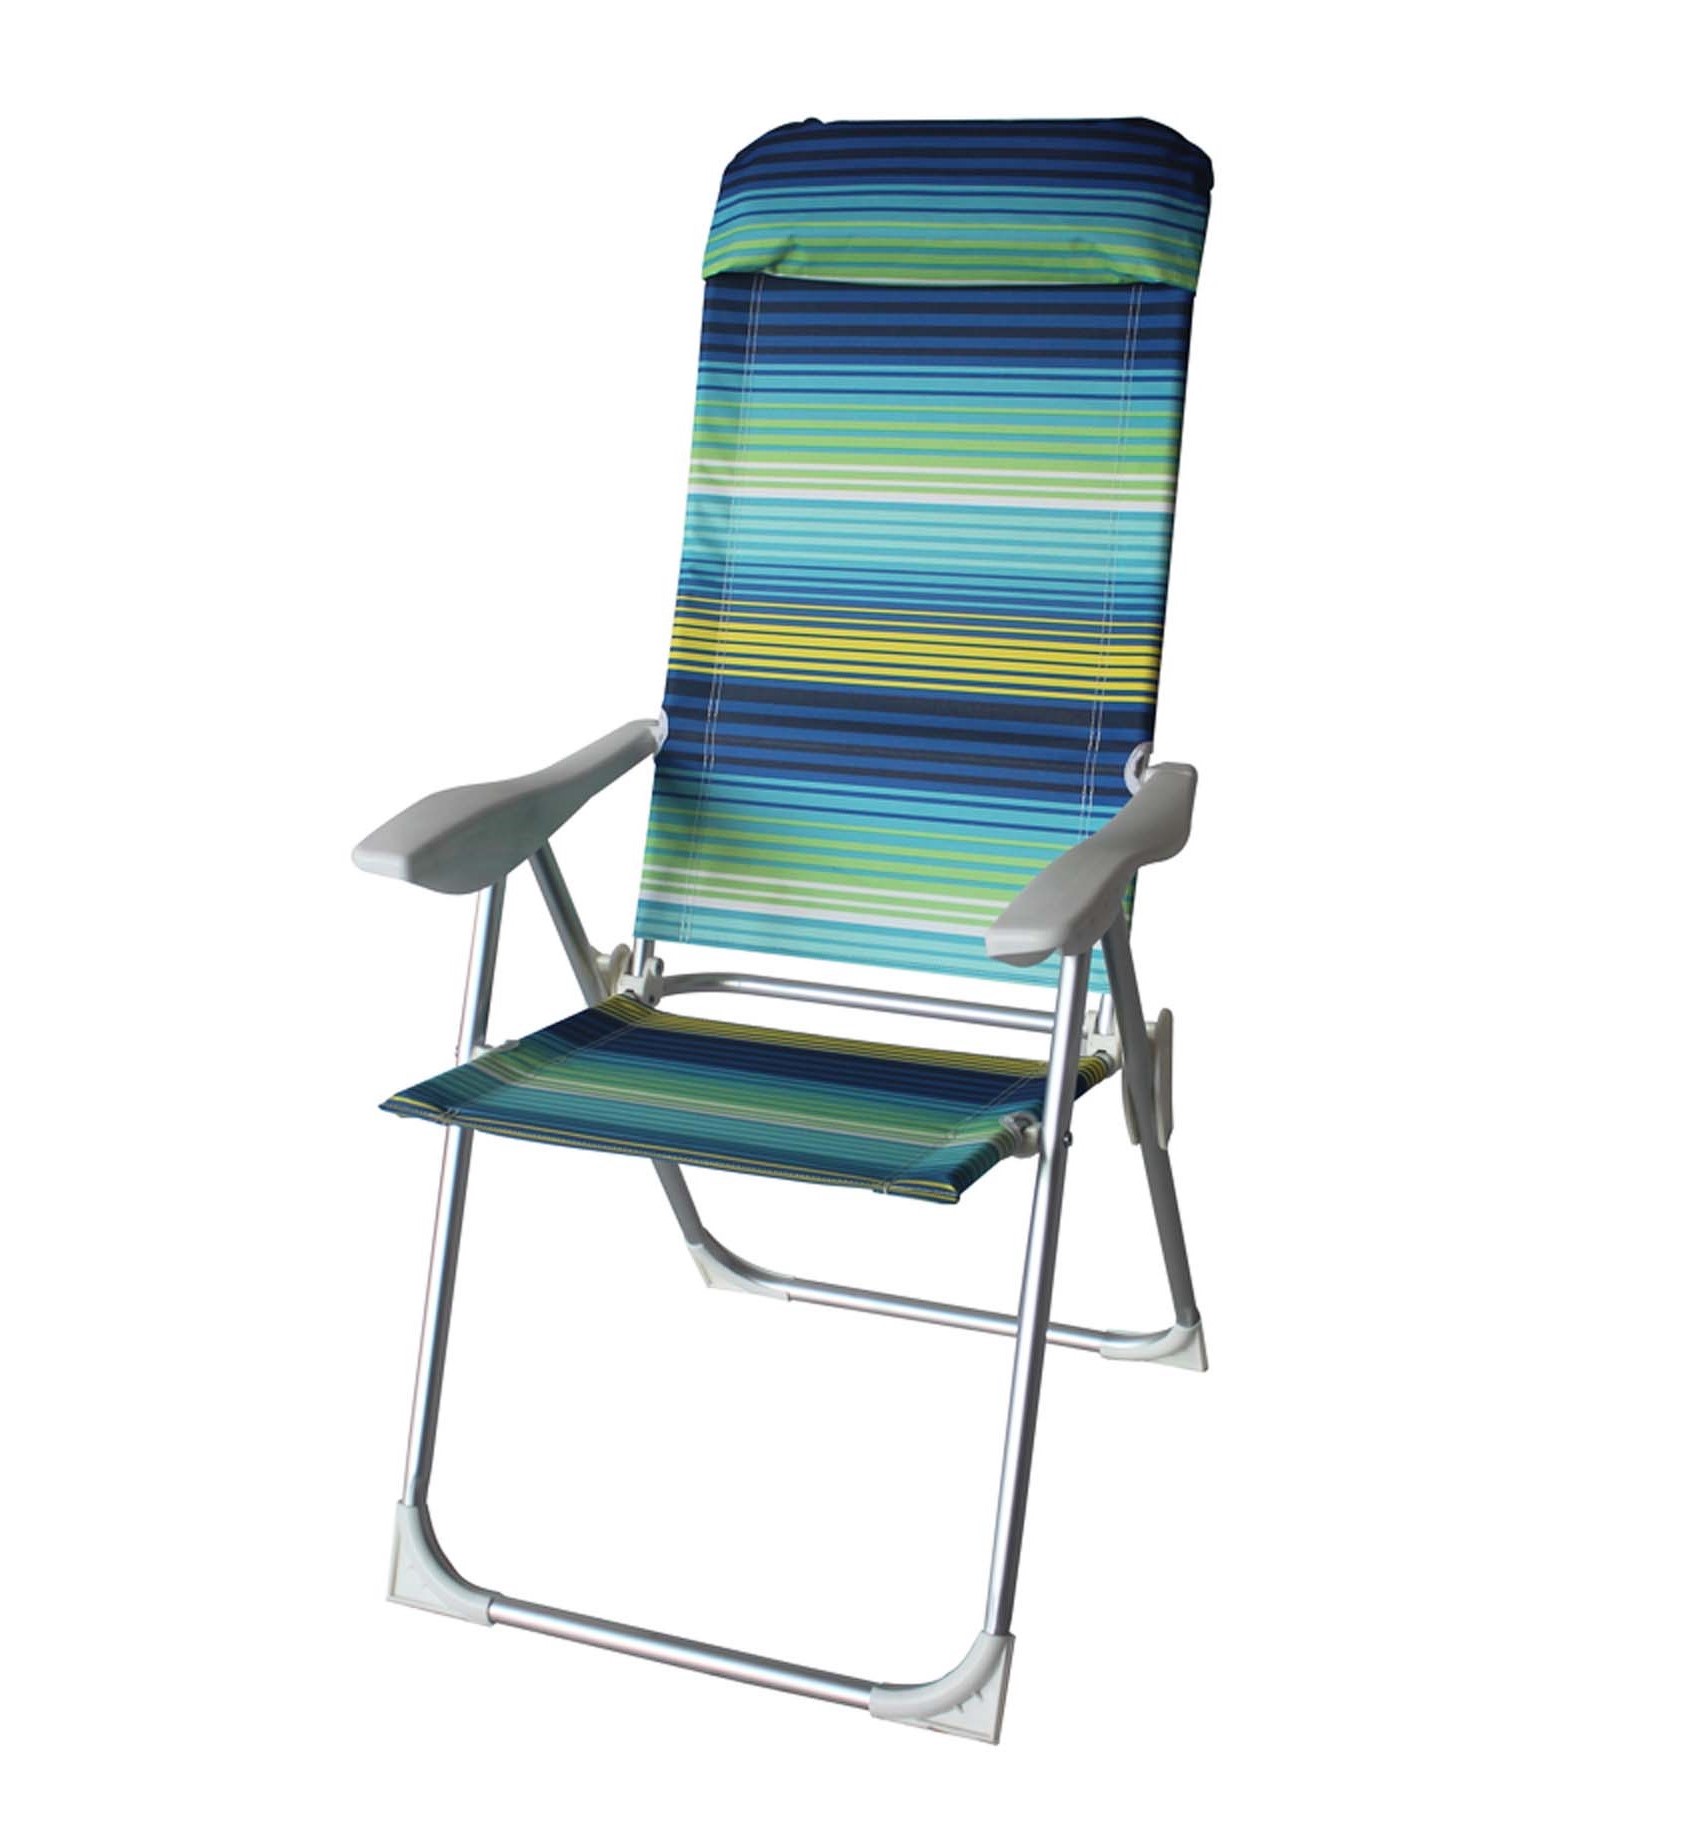 LEDA BEACH CHAIR WITH 5 POSITIONS